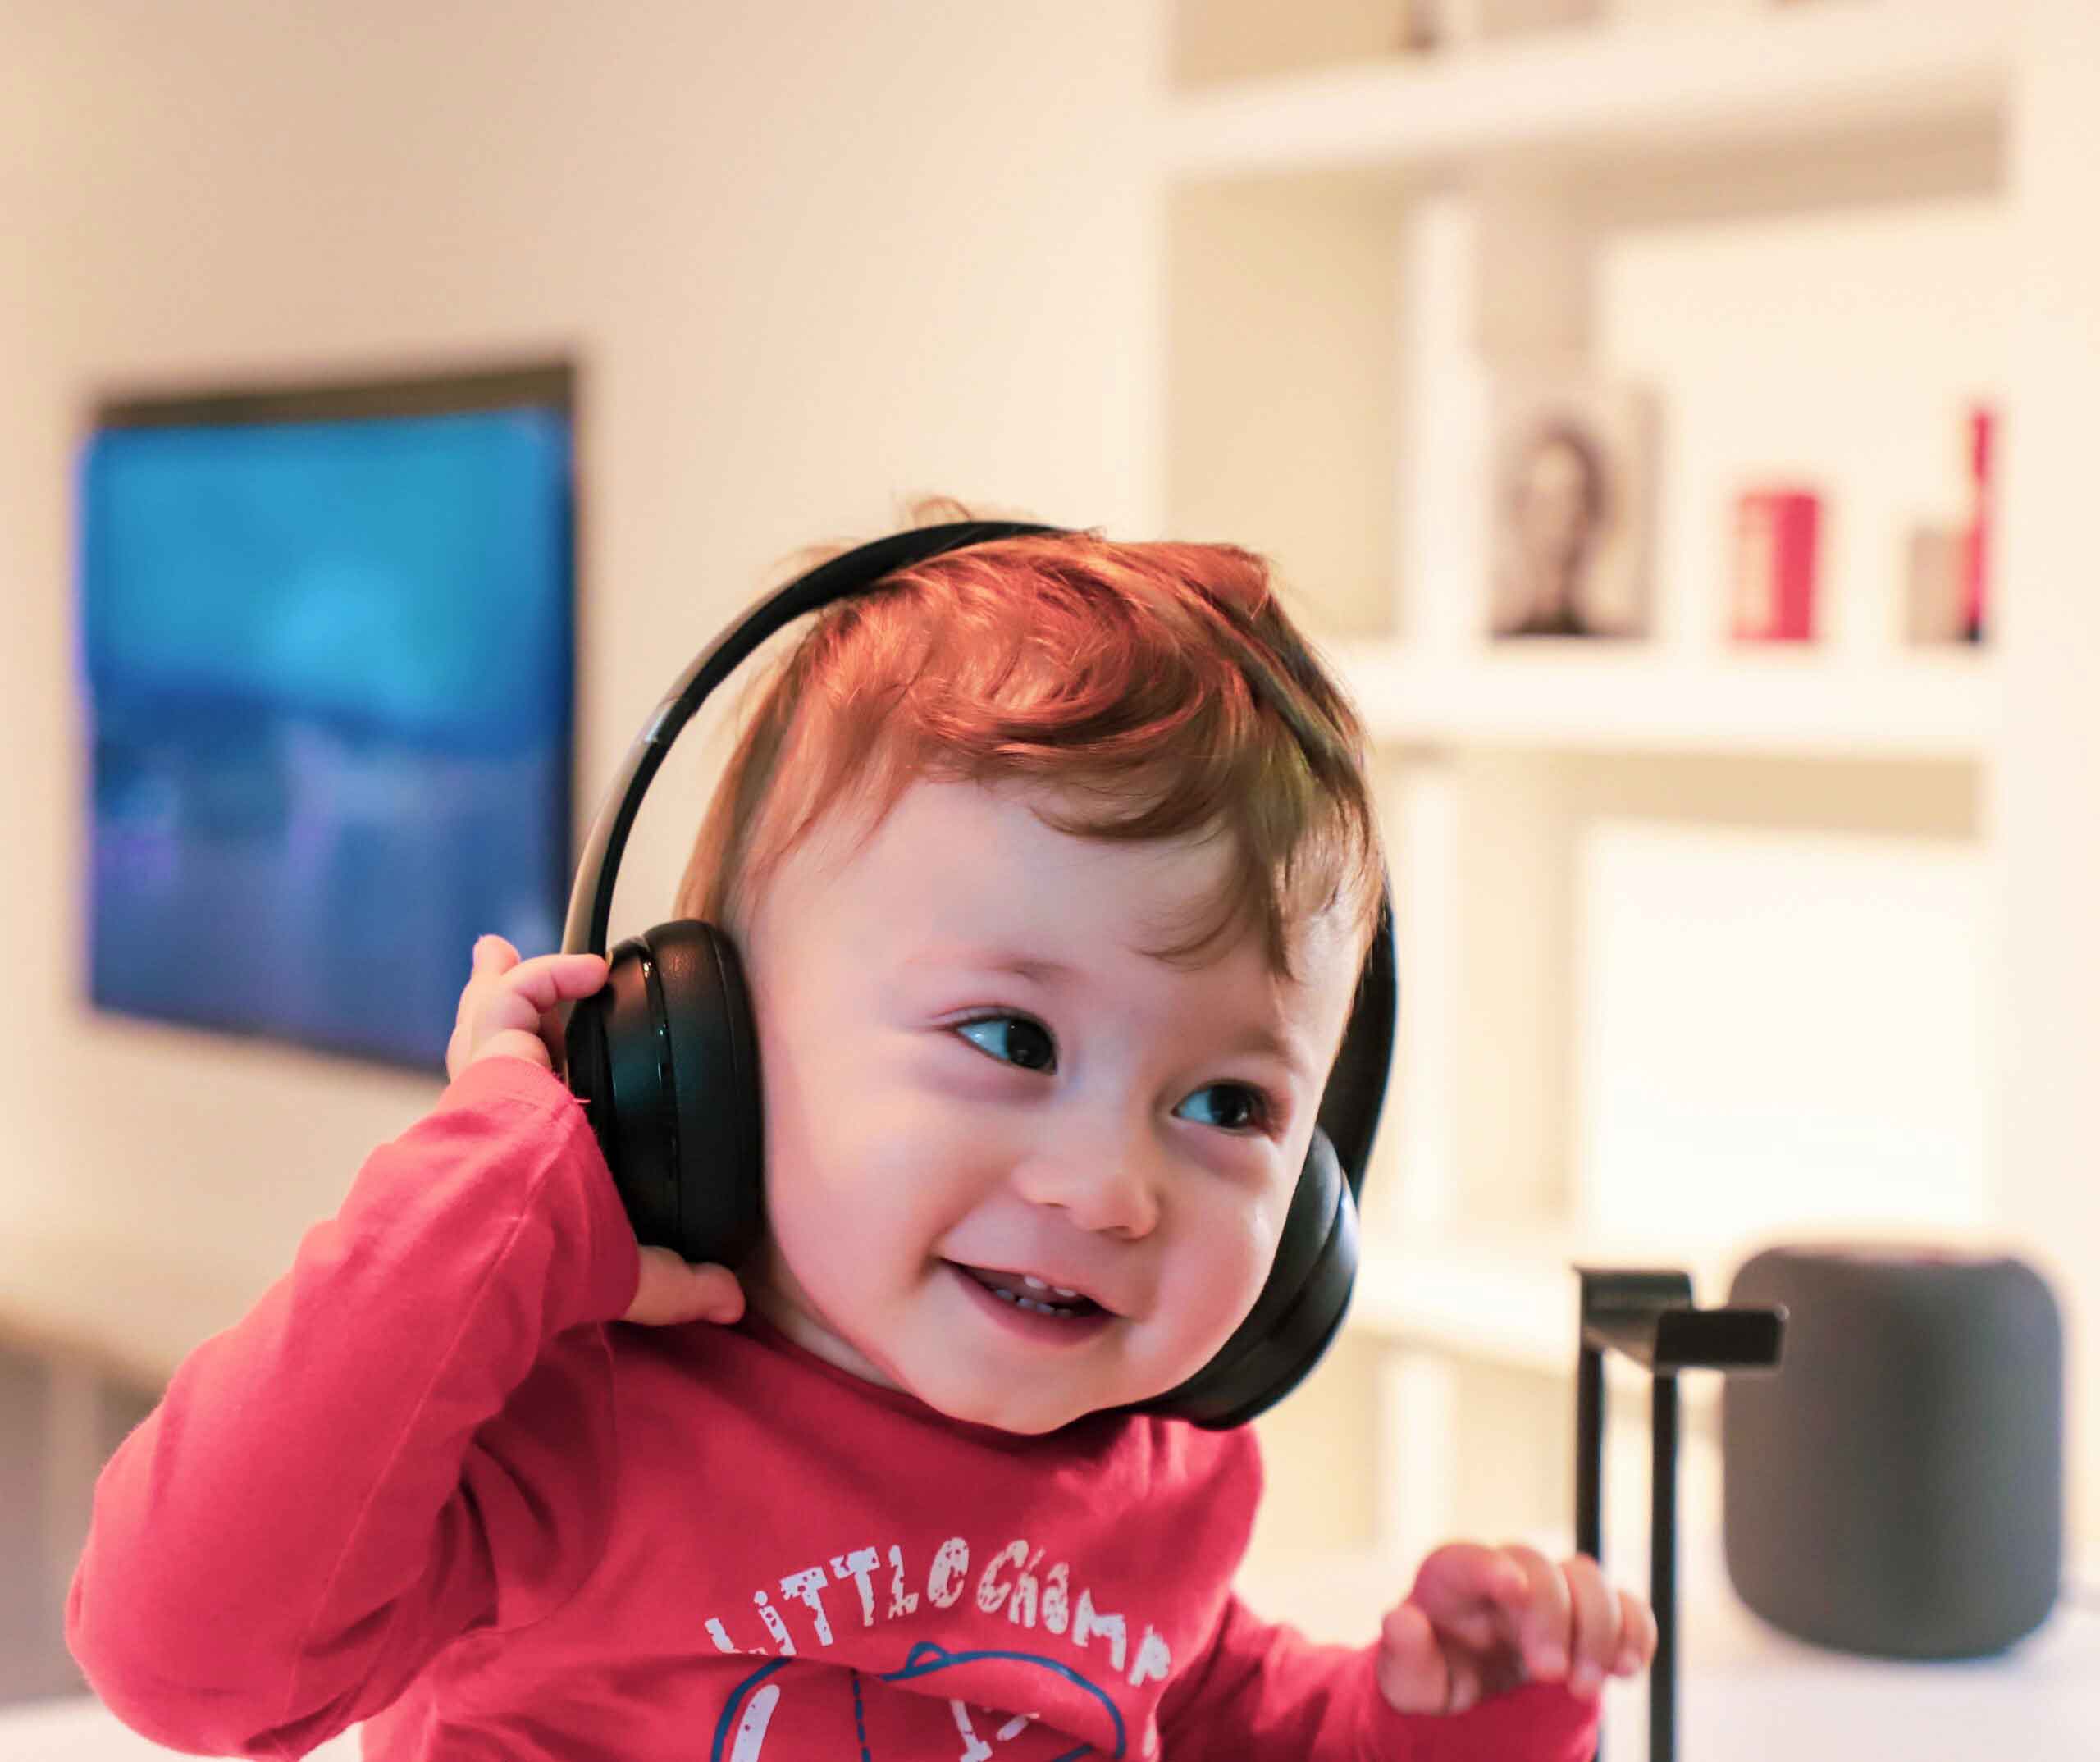 Little kid laughs with earphones on.